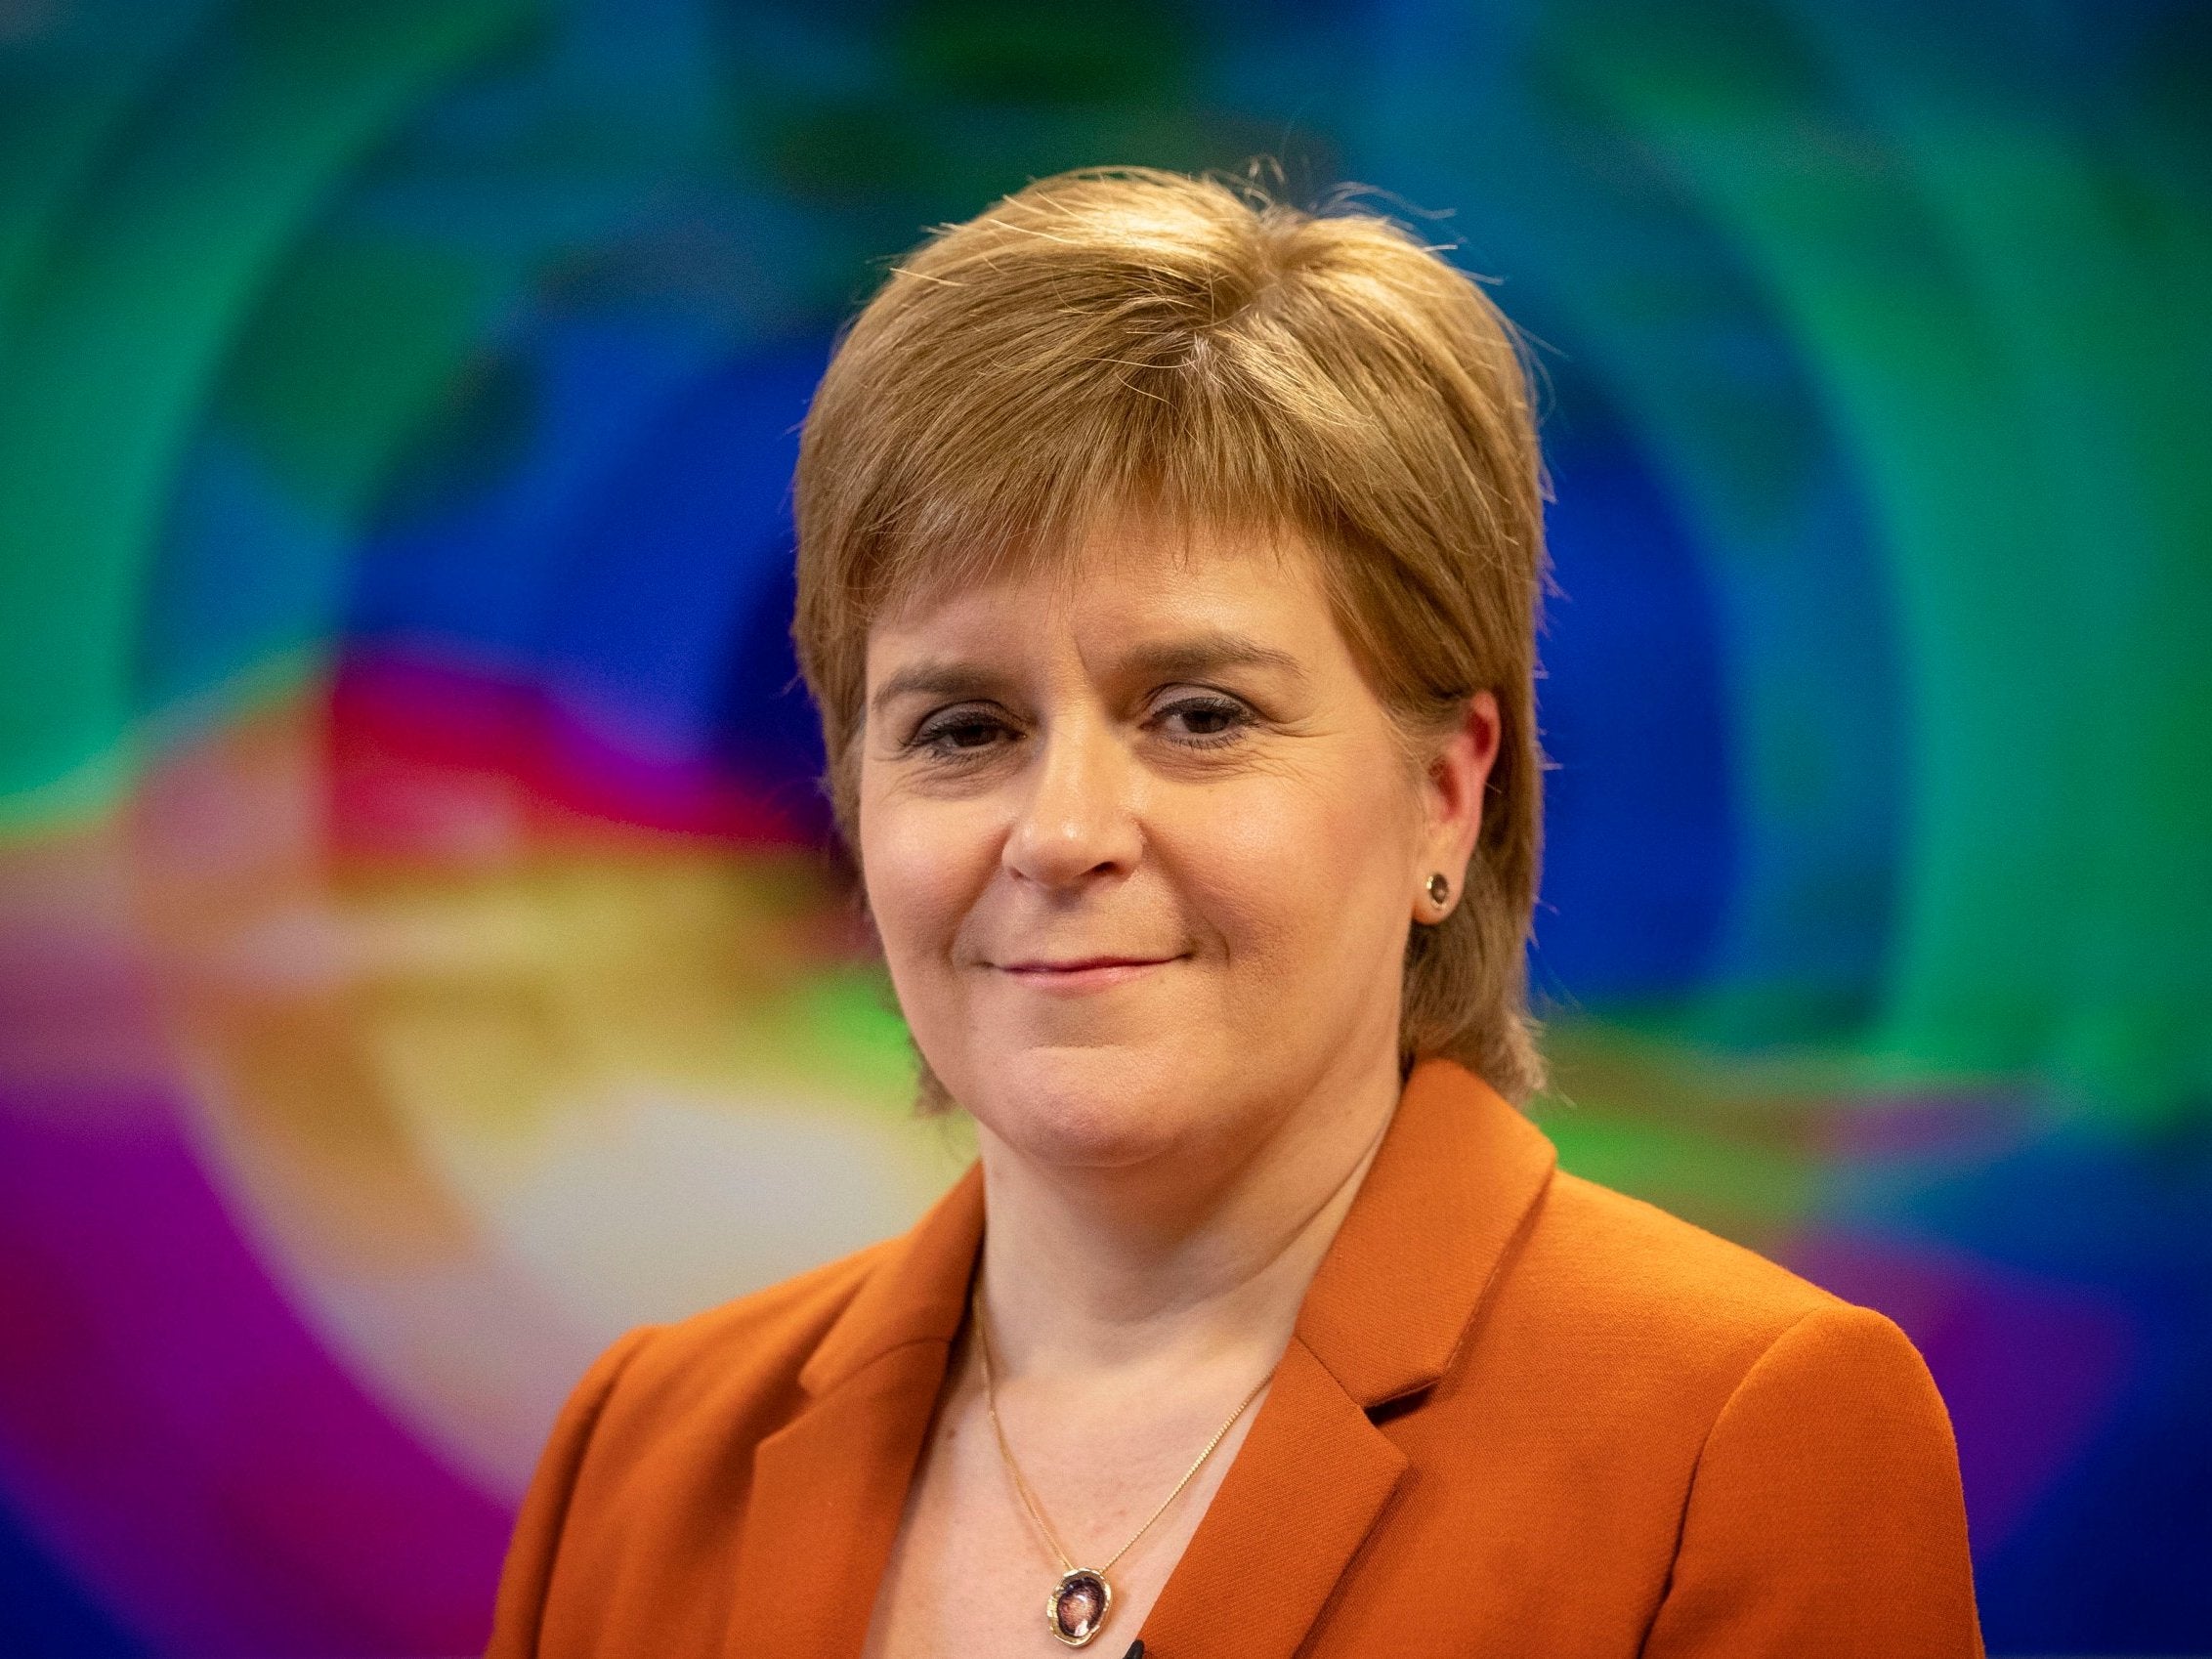 Nicola Sturgeon, the Scottish first minister and leader of the SNP, reacted to the figures with amazement